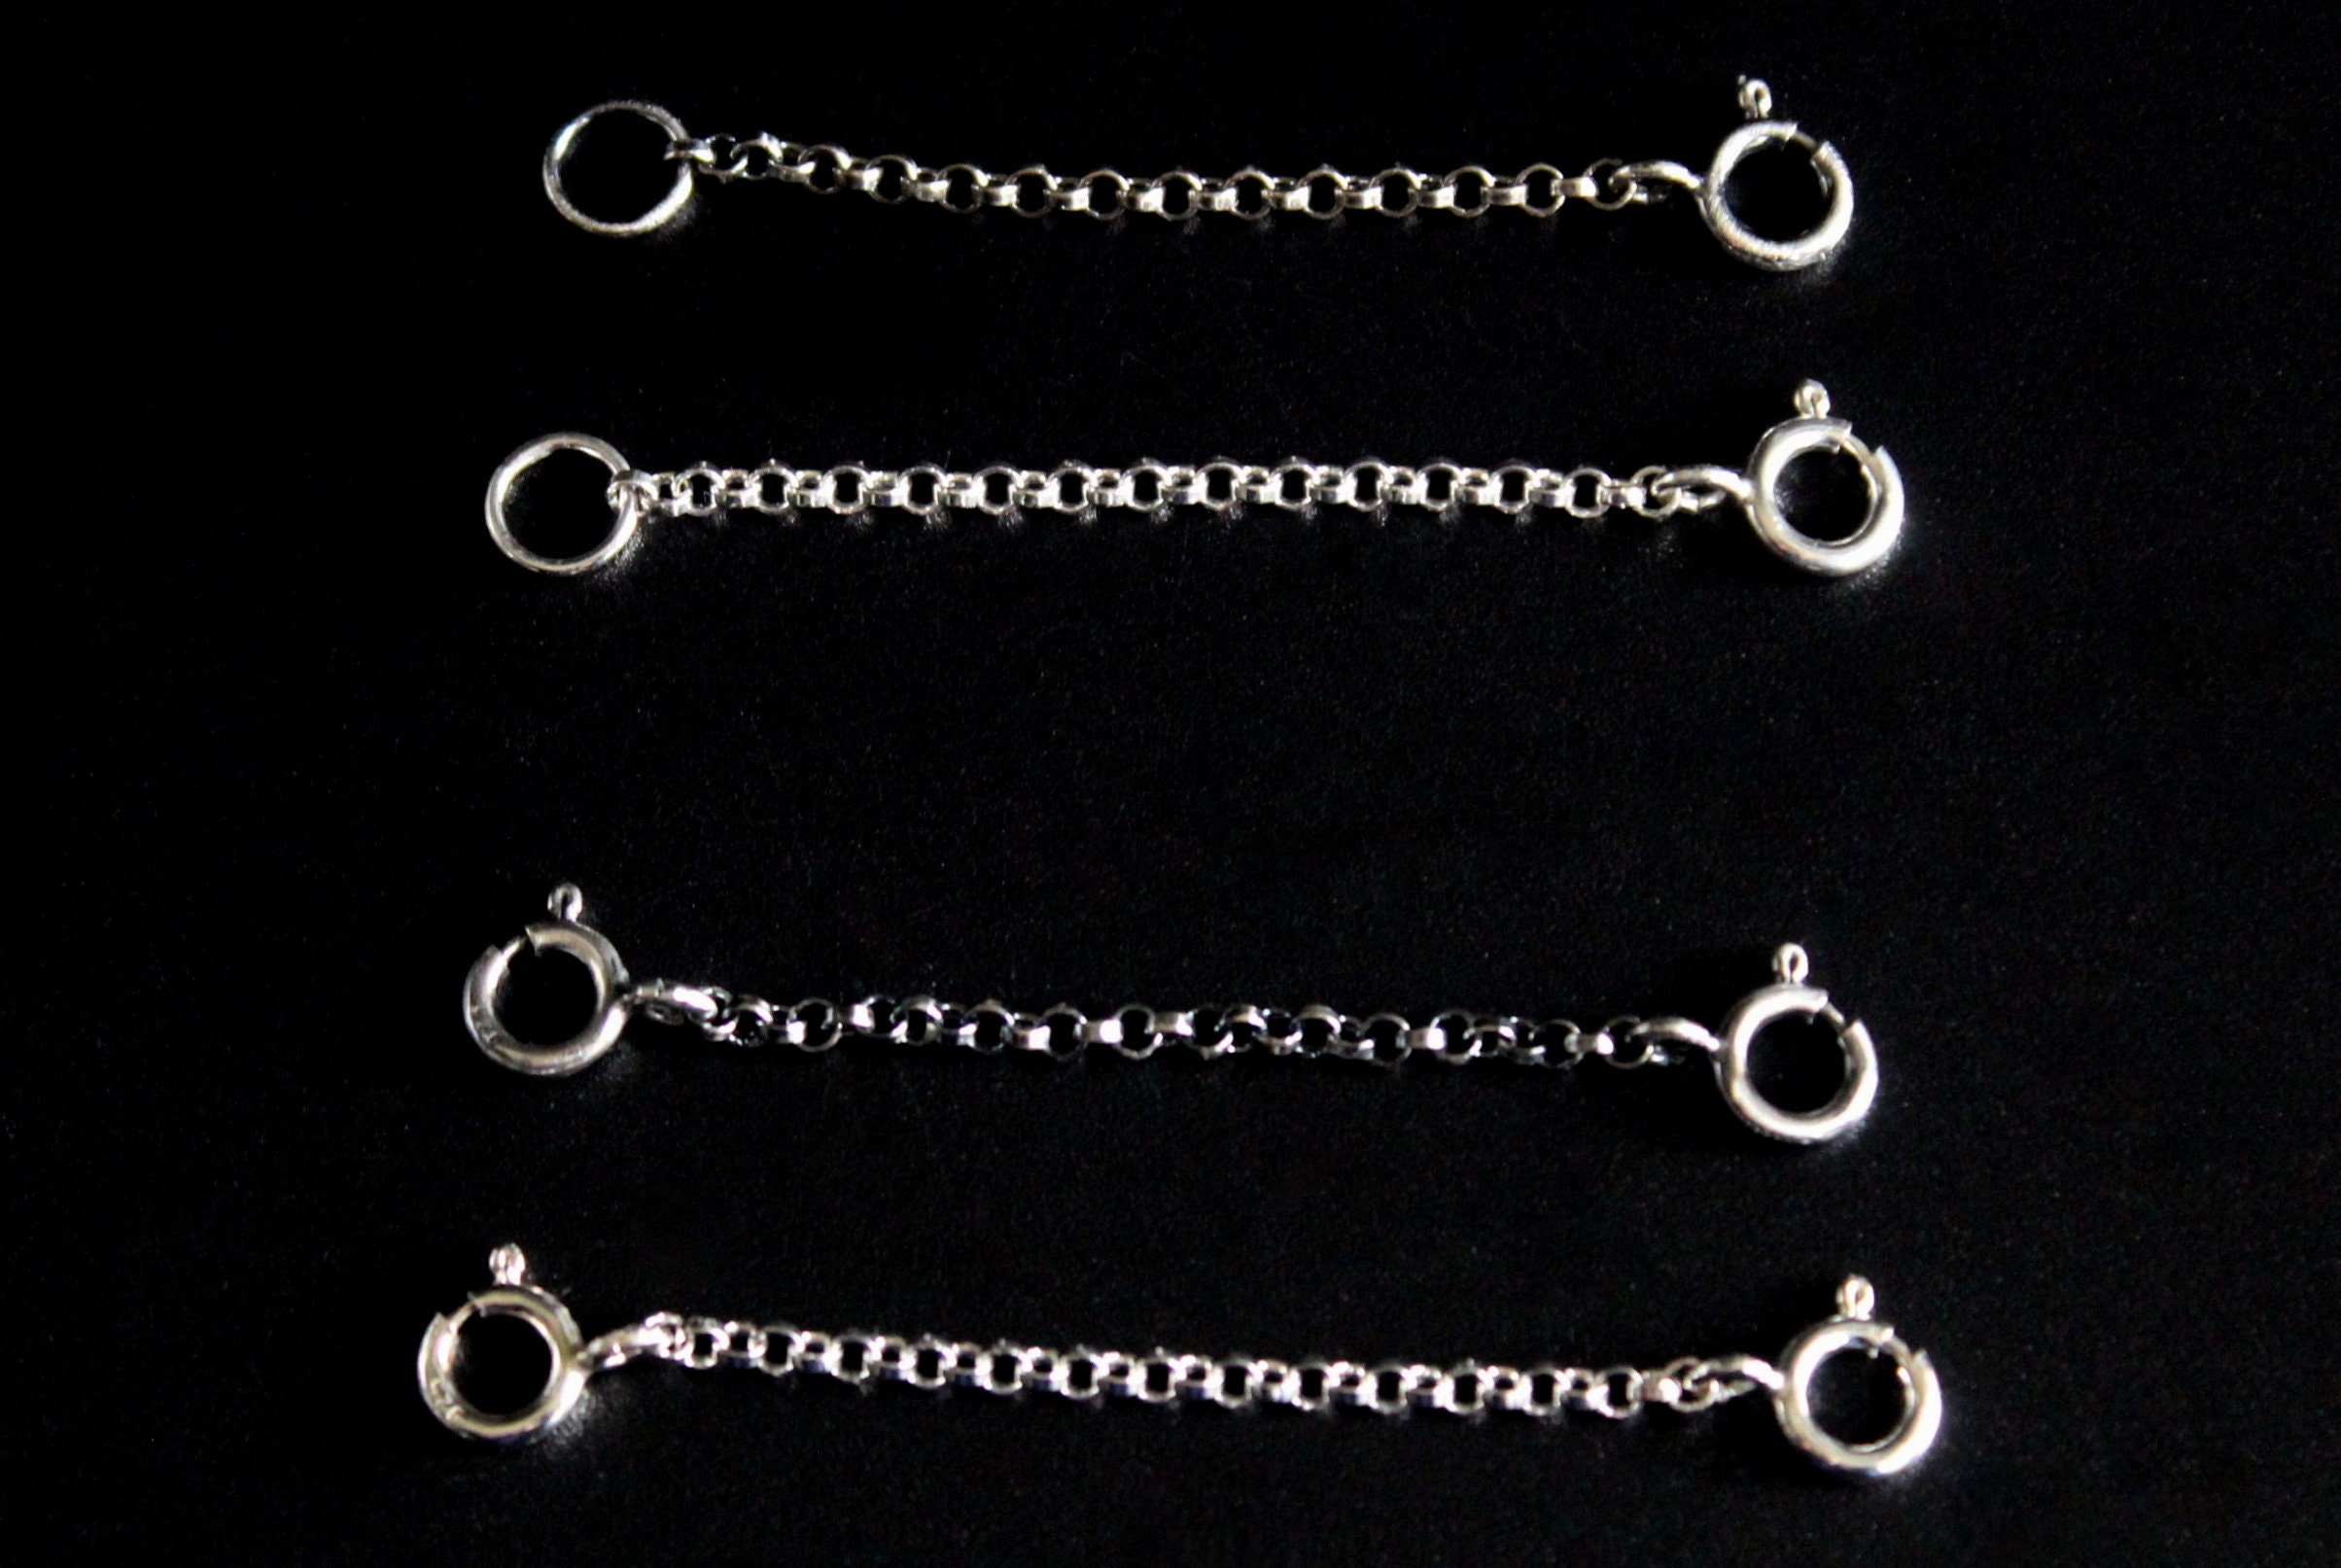 Large Sterling silver toggle clasp necklace extender extension 2, 3 & 4  inch options - South Paw Studios Handcrafted Designer Jewelry